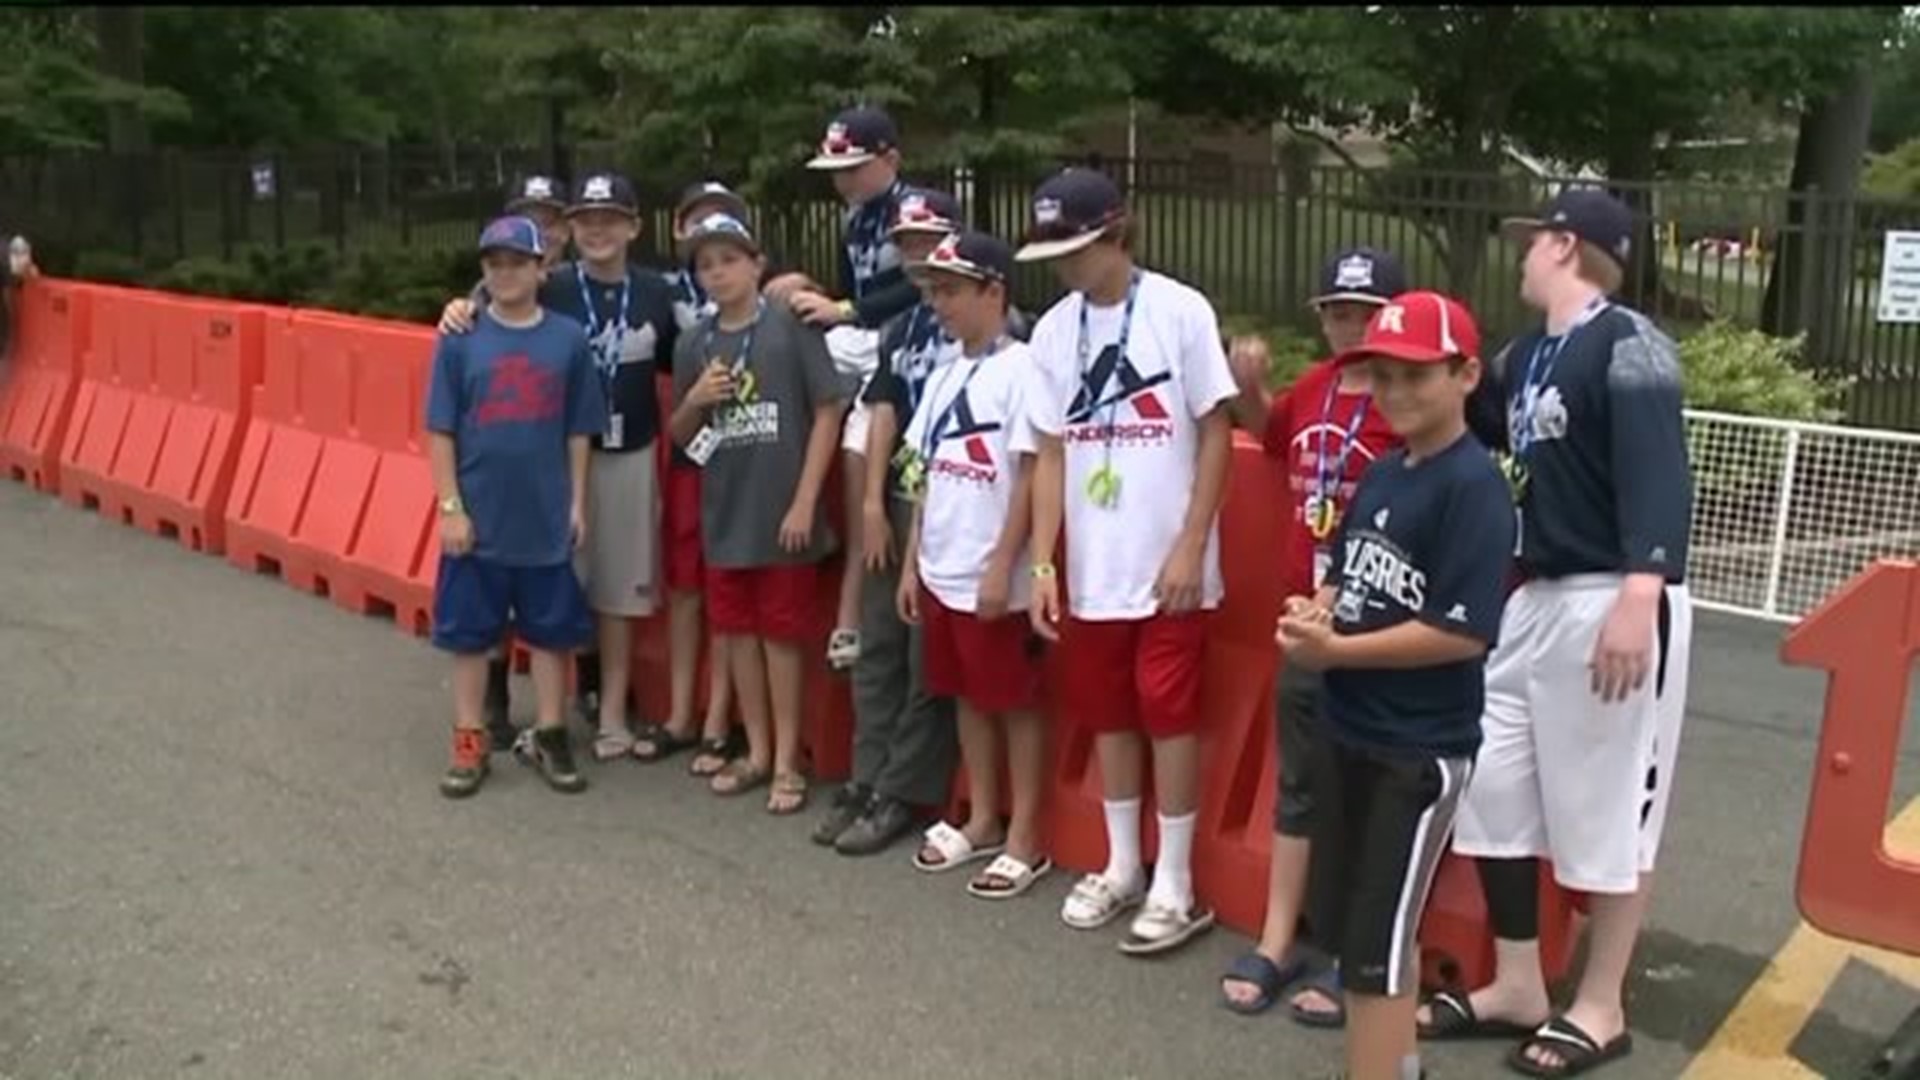 Buzz Builds Over PA Team in Little League World Series